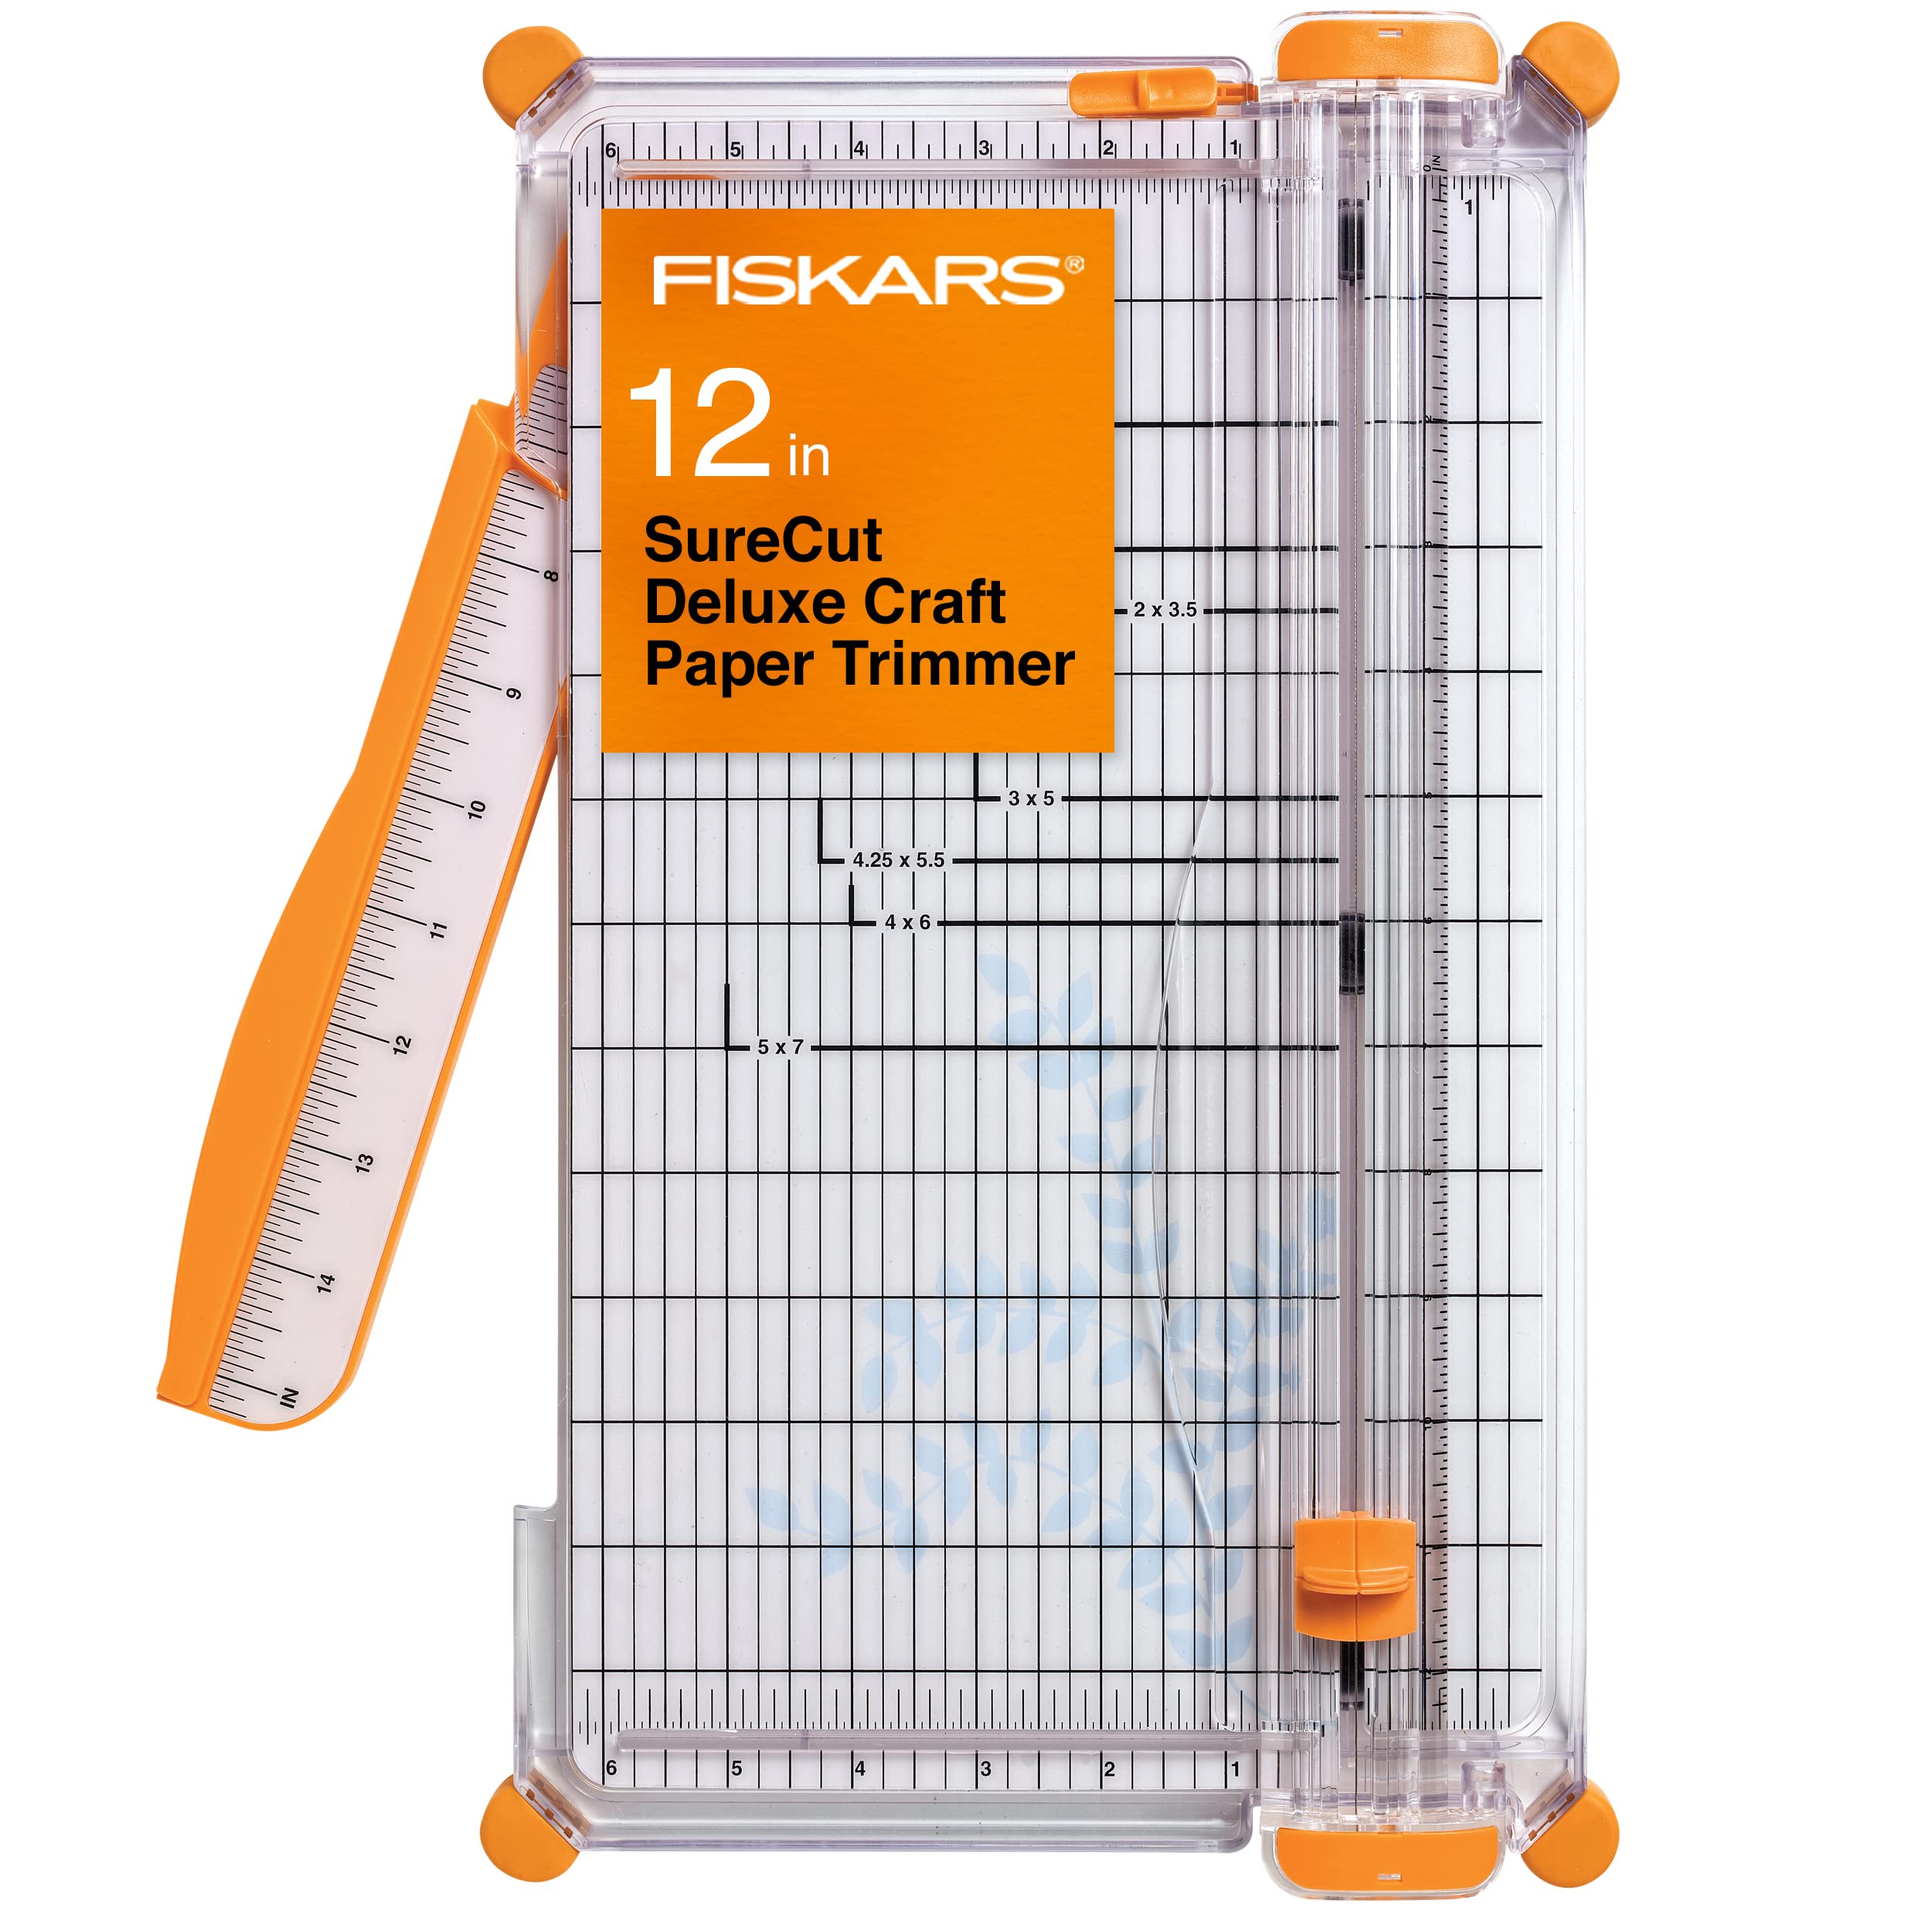 Fiskars SureCut™ Deluxe Craft Paper Trimmer - 12” Cut Length - Craft and Office Paper Cutter with Grid Lines - White